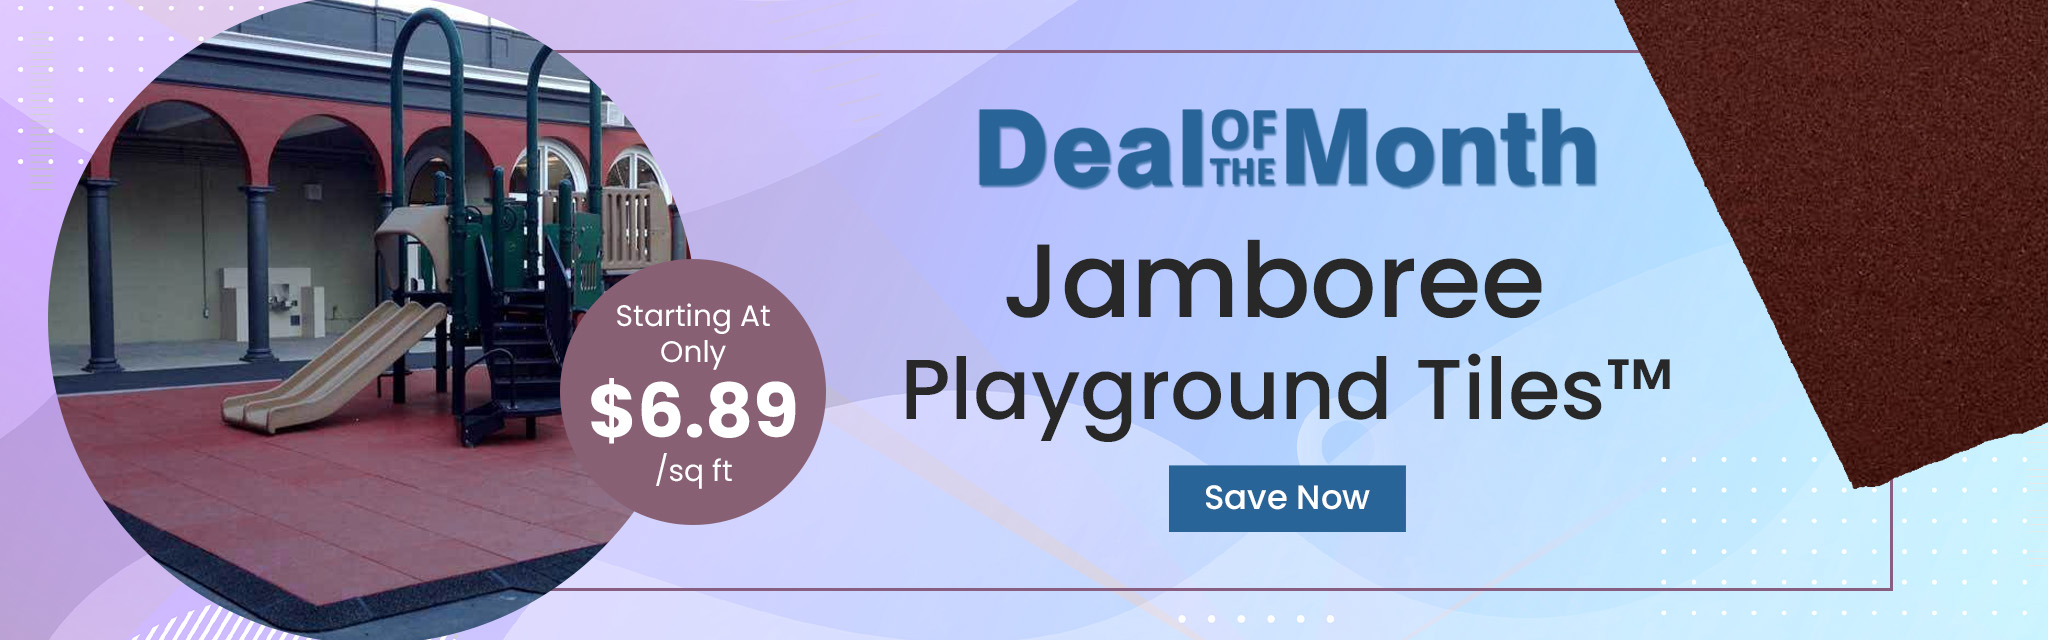 Deal Of The Month. Jamboree Playground Tiles™. Starting At Only $6.89 per square feet. Save Now